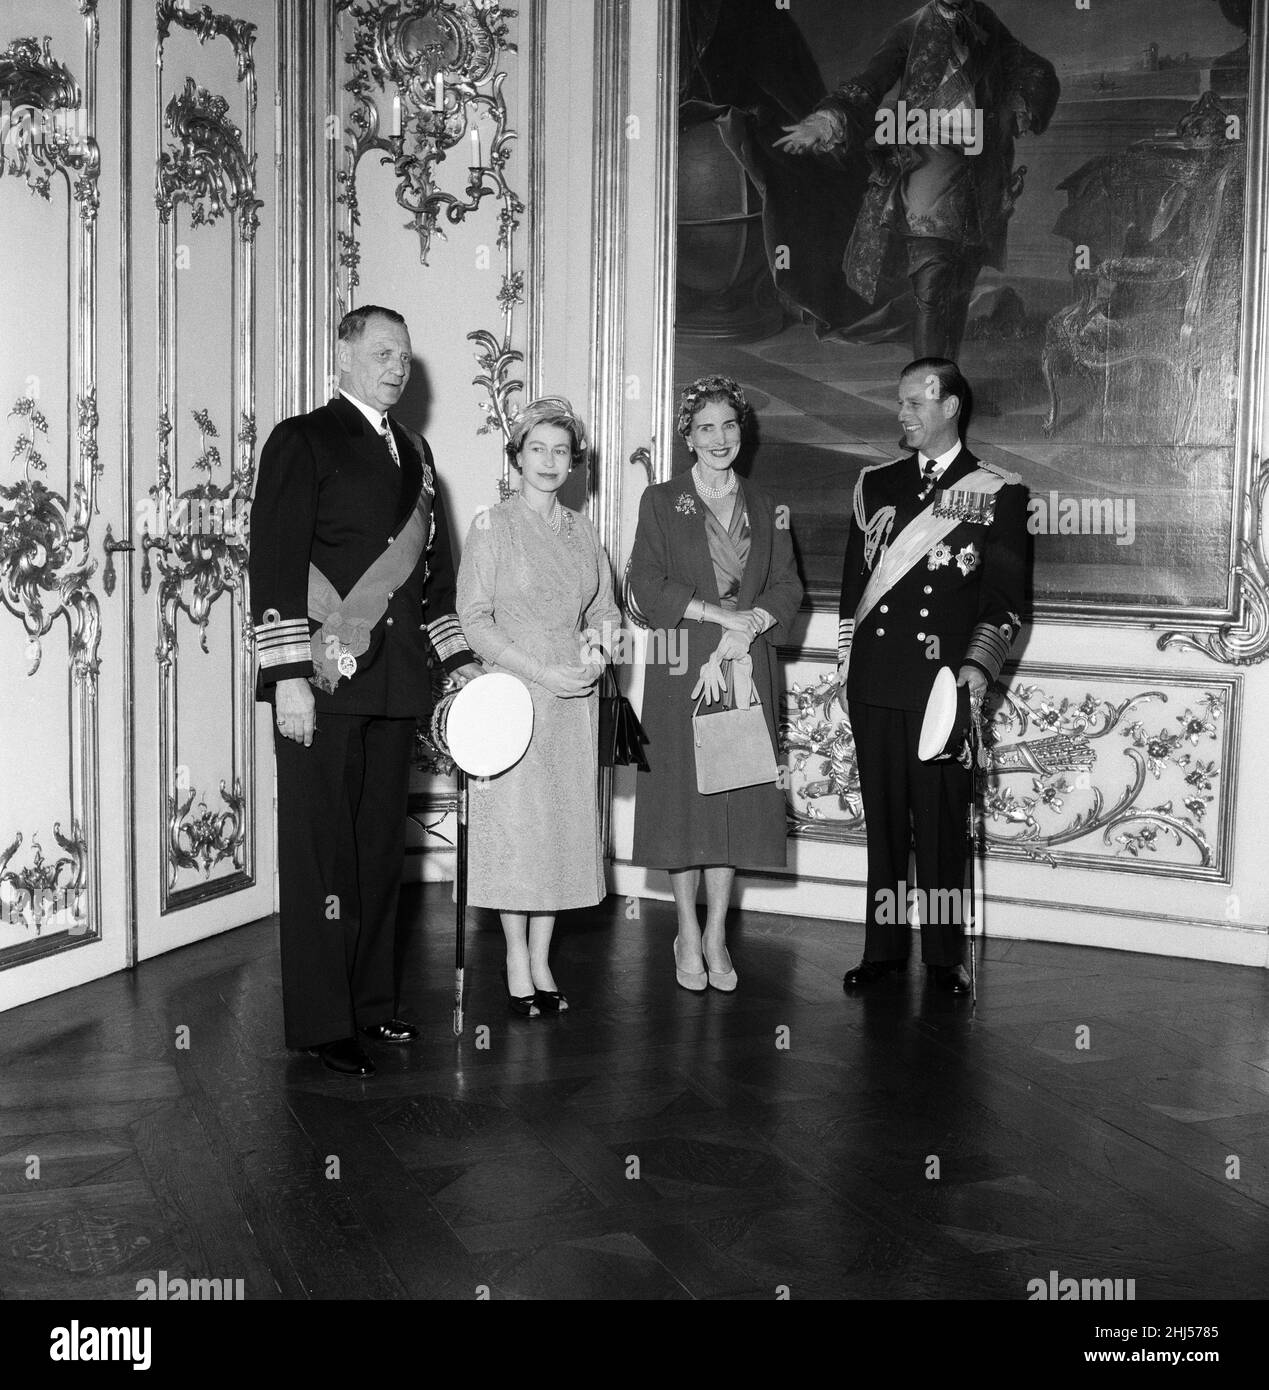 Queen Elizabeth II and Prince Philip, Duke of Edinburgh visit to Denmark. At Amalienborg Palace, left to right, King Frederik IX of Denmark, Queen Elizabeth II, Queen Ingrid of Denmark and Prince Philip. 21st May 1957. Stock Photo